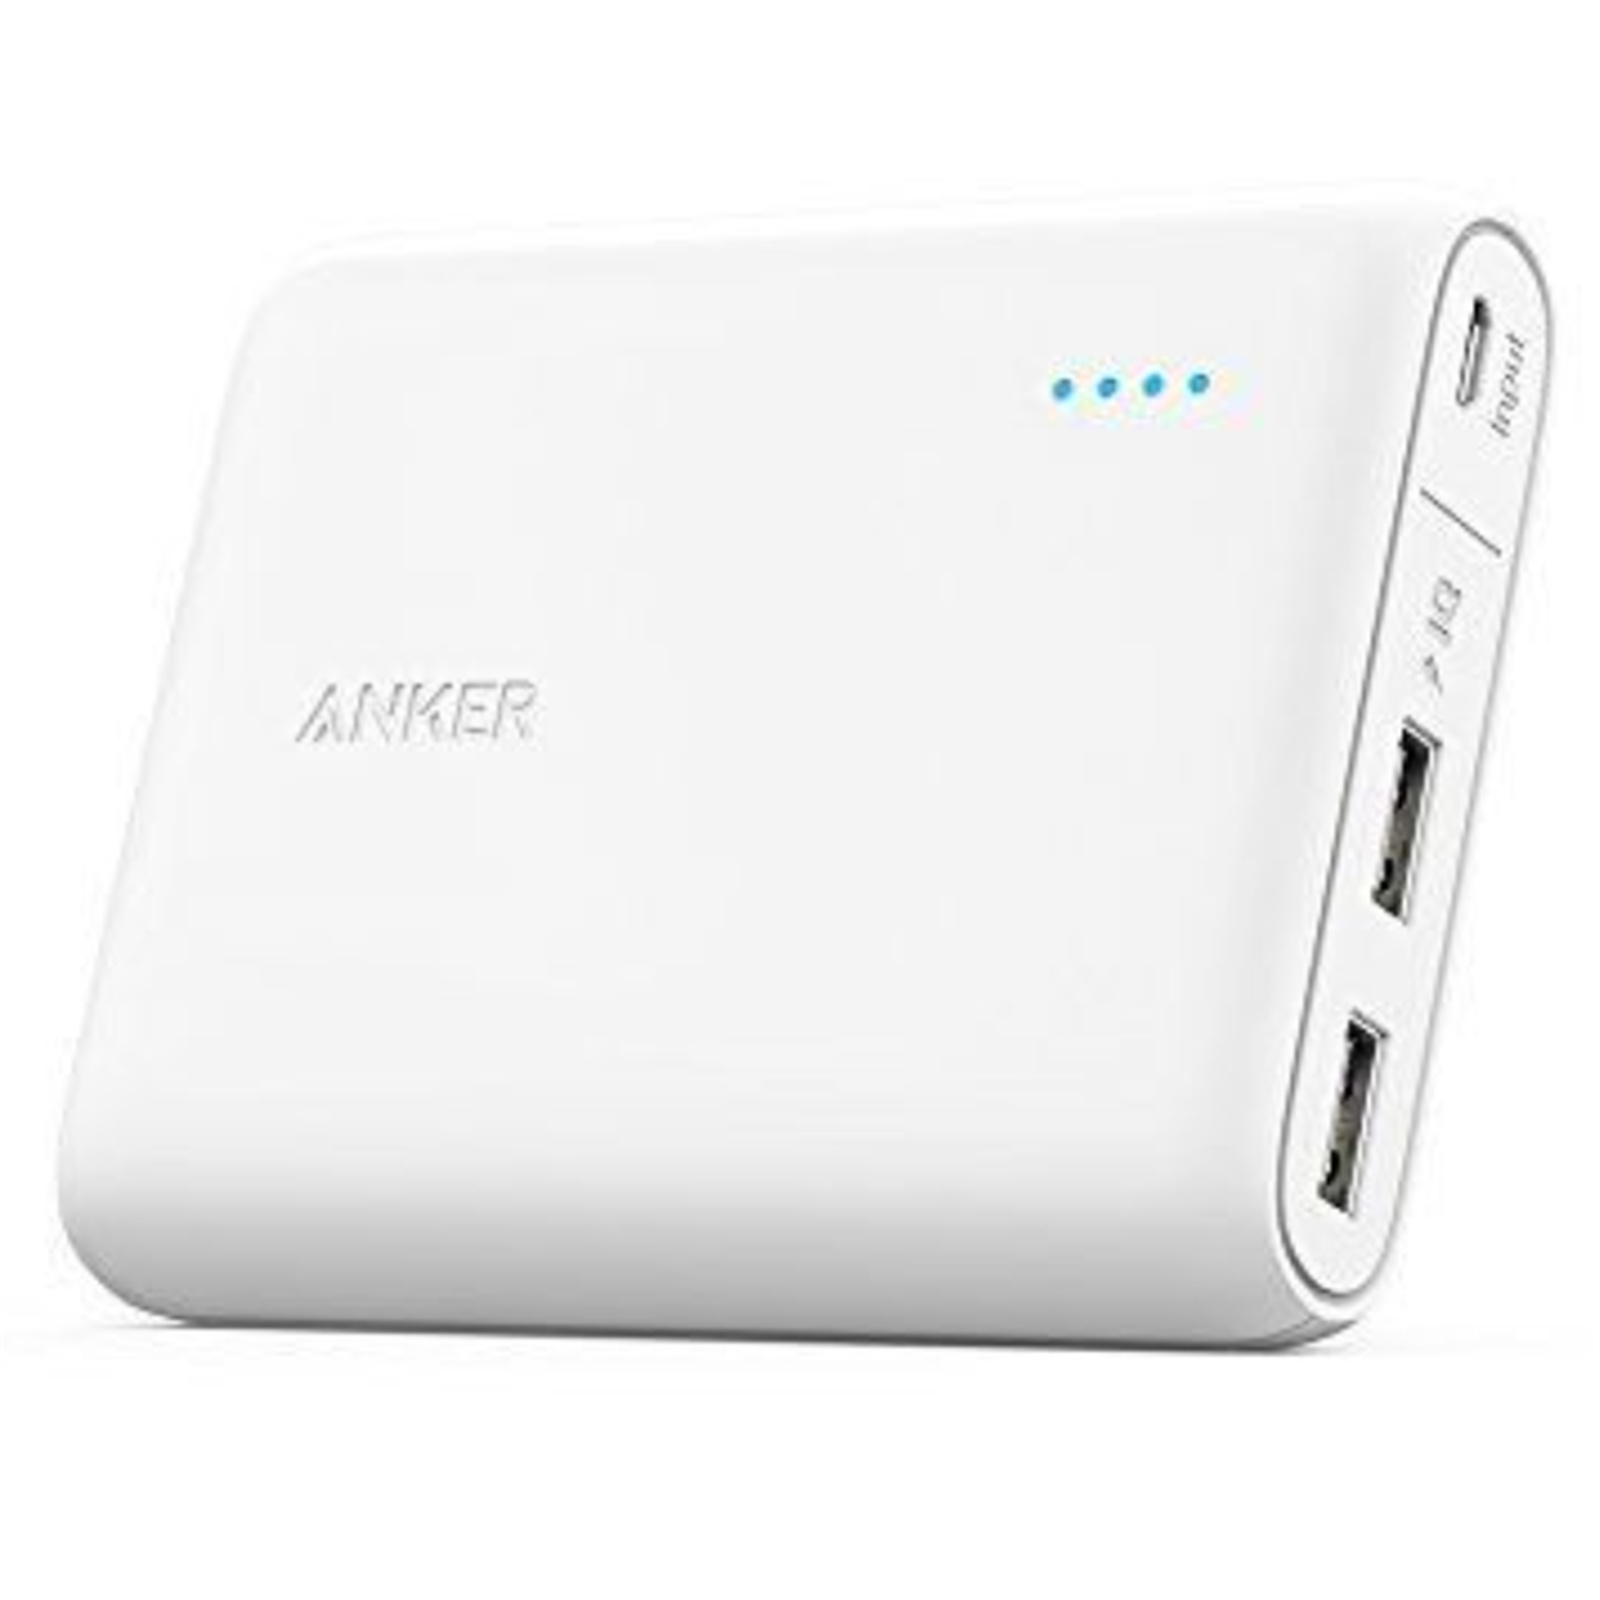 Buy the ANKER PowerCore 10400 mAh Power Bank - White ( A1214H21 ) online -  PBTech.com/pacific